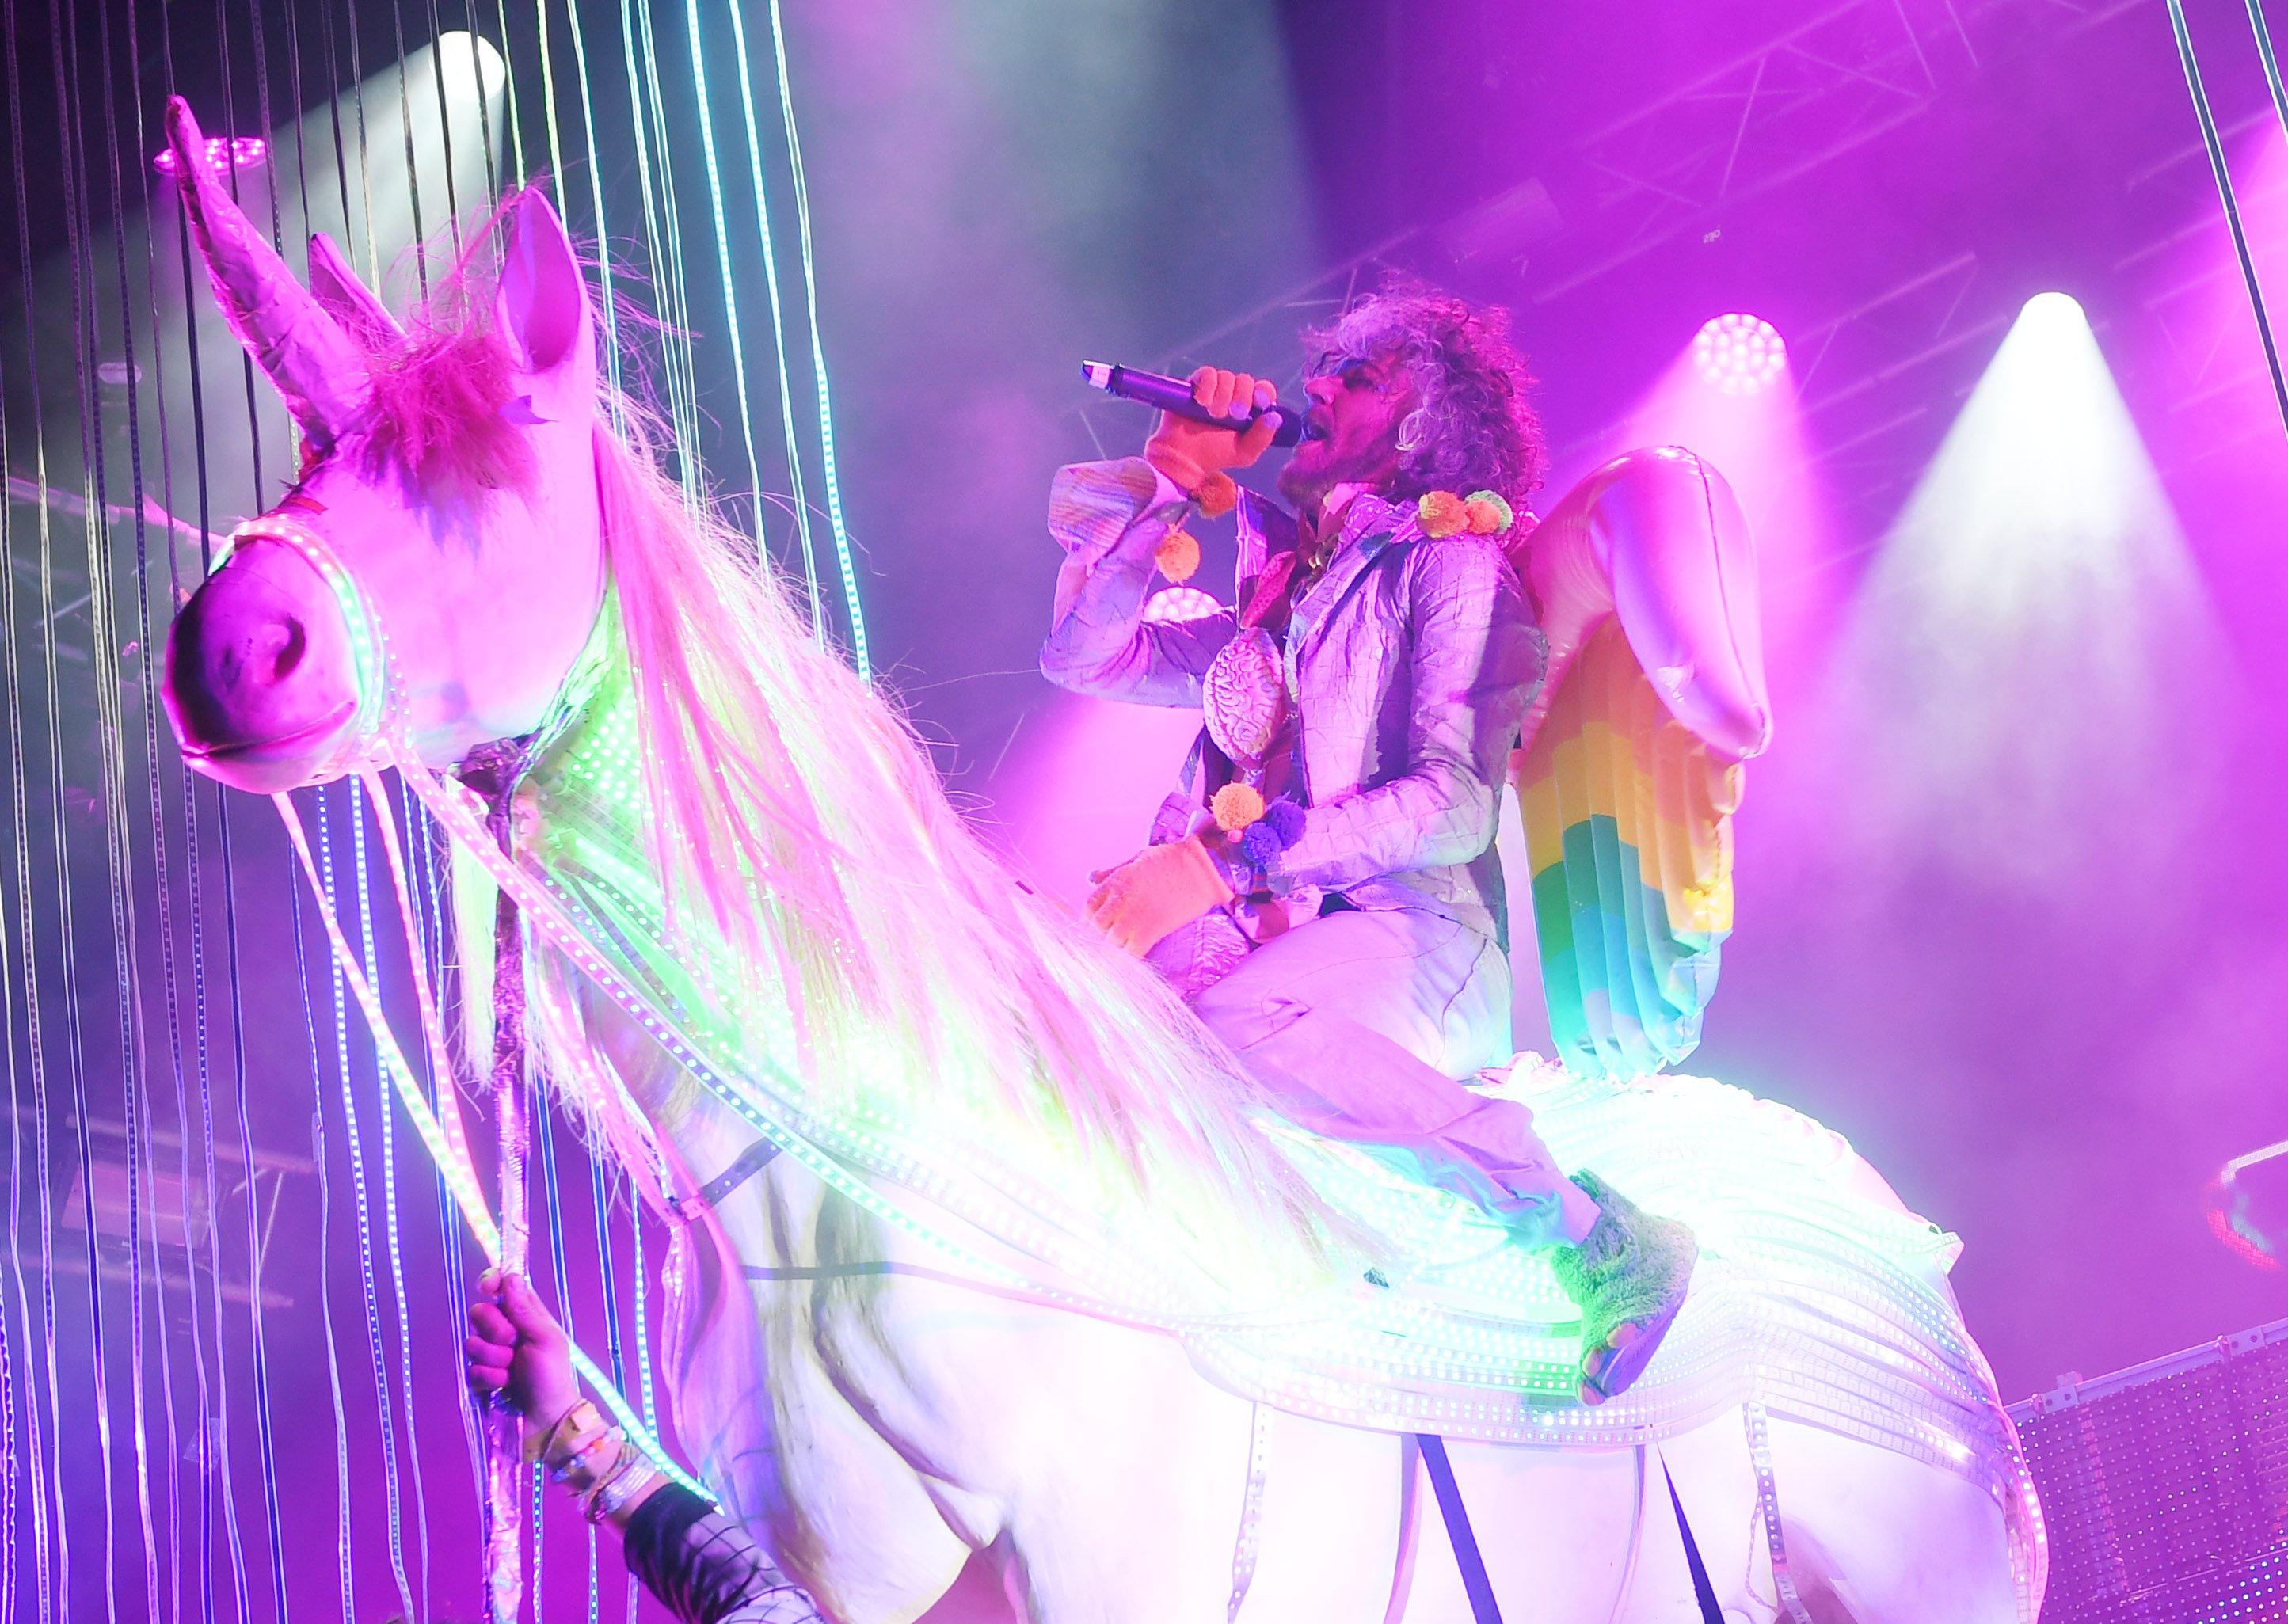 Wayne Coyne performs with The Flaming Lips